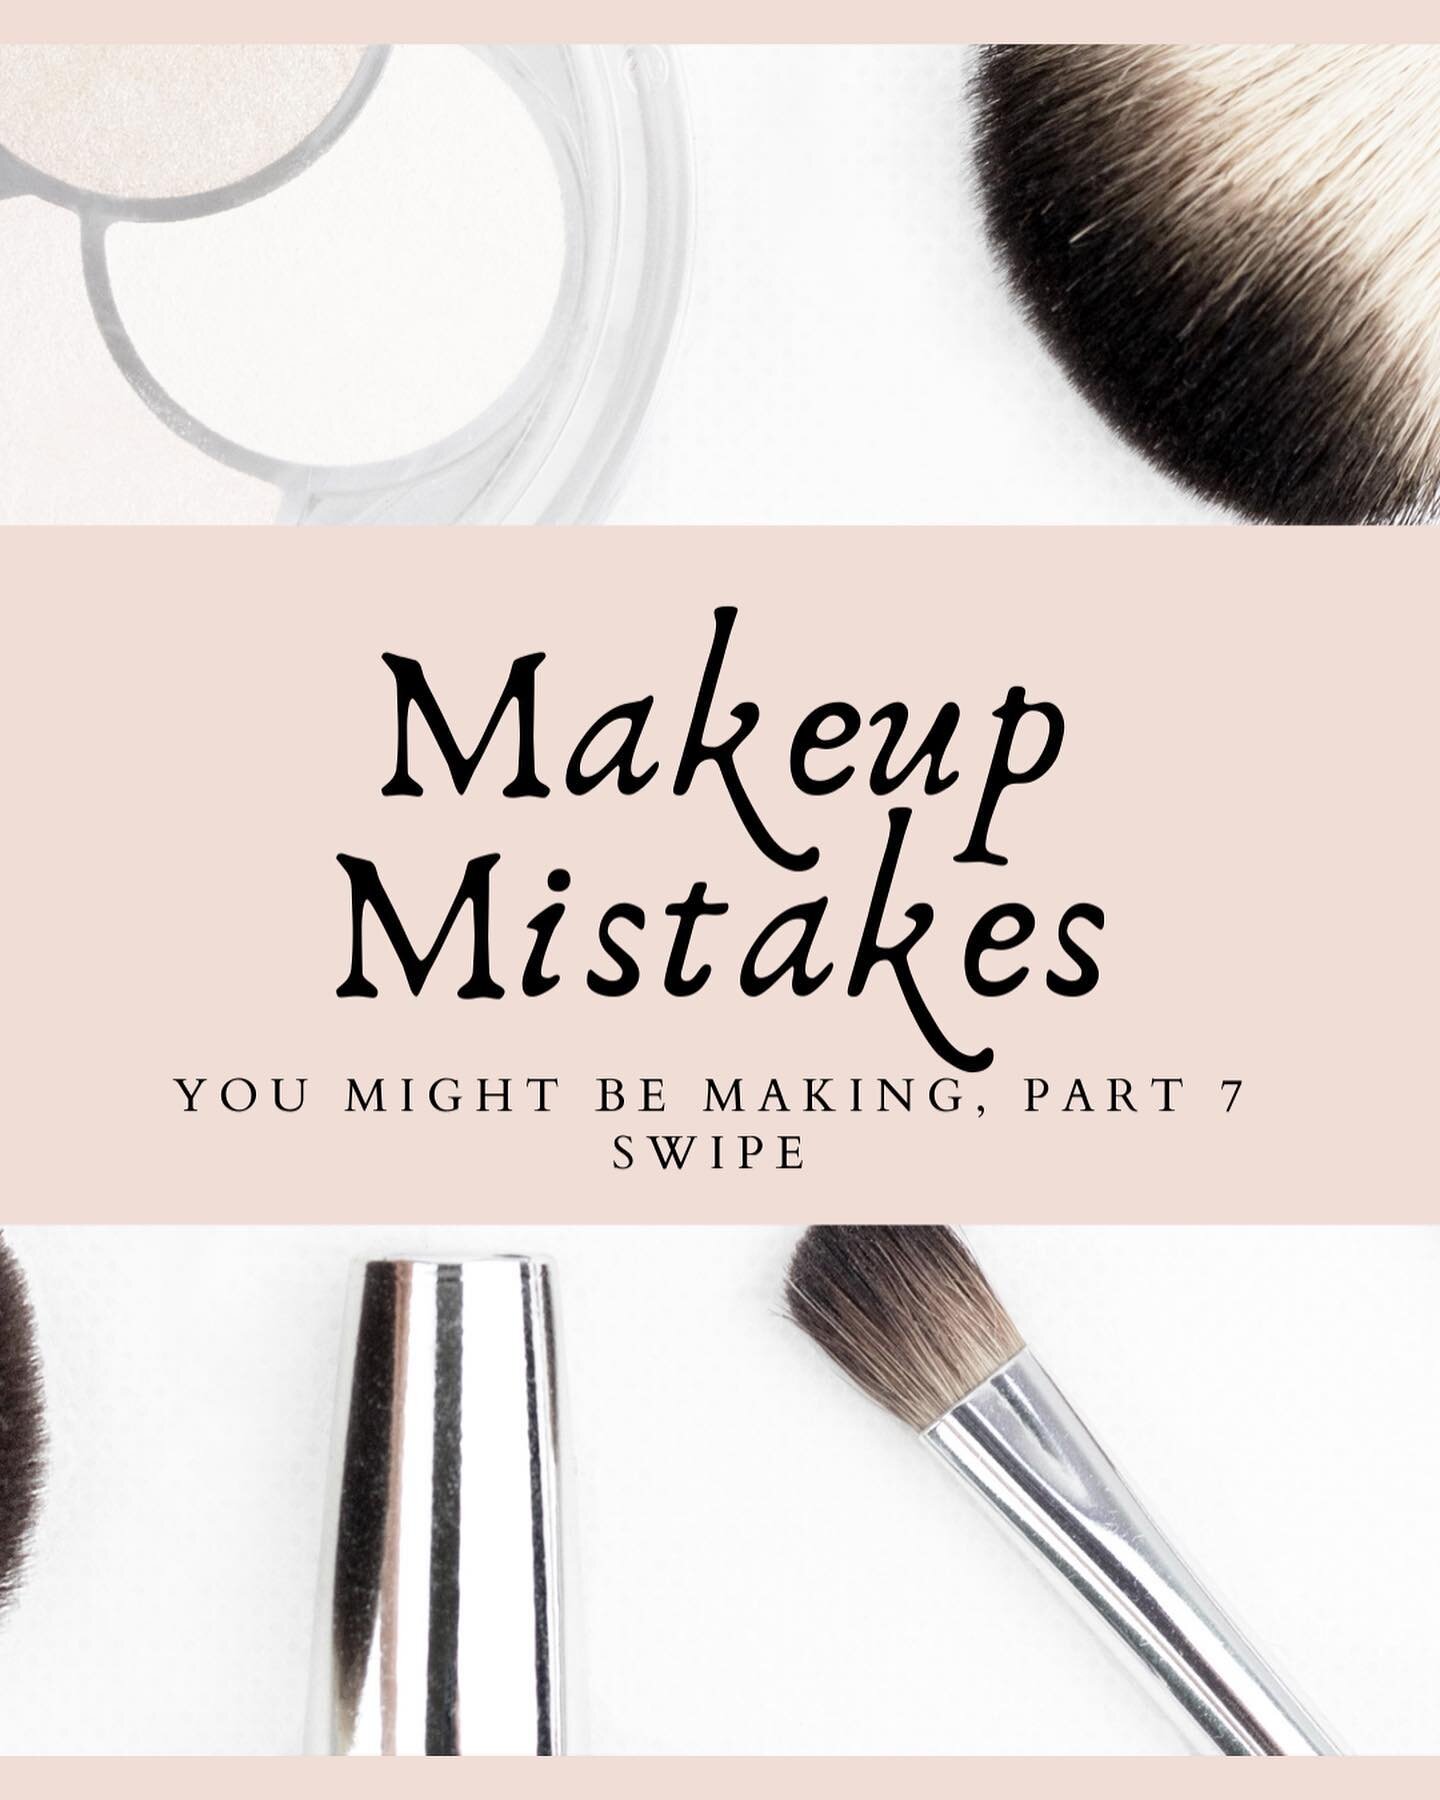 Makeup Mistakes you might be making, part 7! 

How you apply translucent powder matters! Swipe to see how I like to apply it to ensure maximum benefits.

Share this with a friend and save it for later 🤗 

#makeuptipsforbeginners #makeupmadeeasy #lea